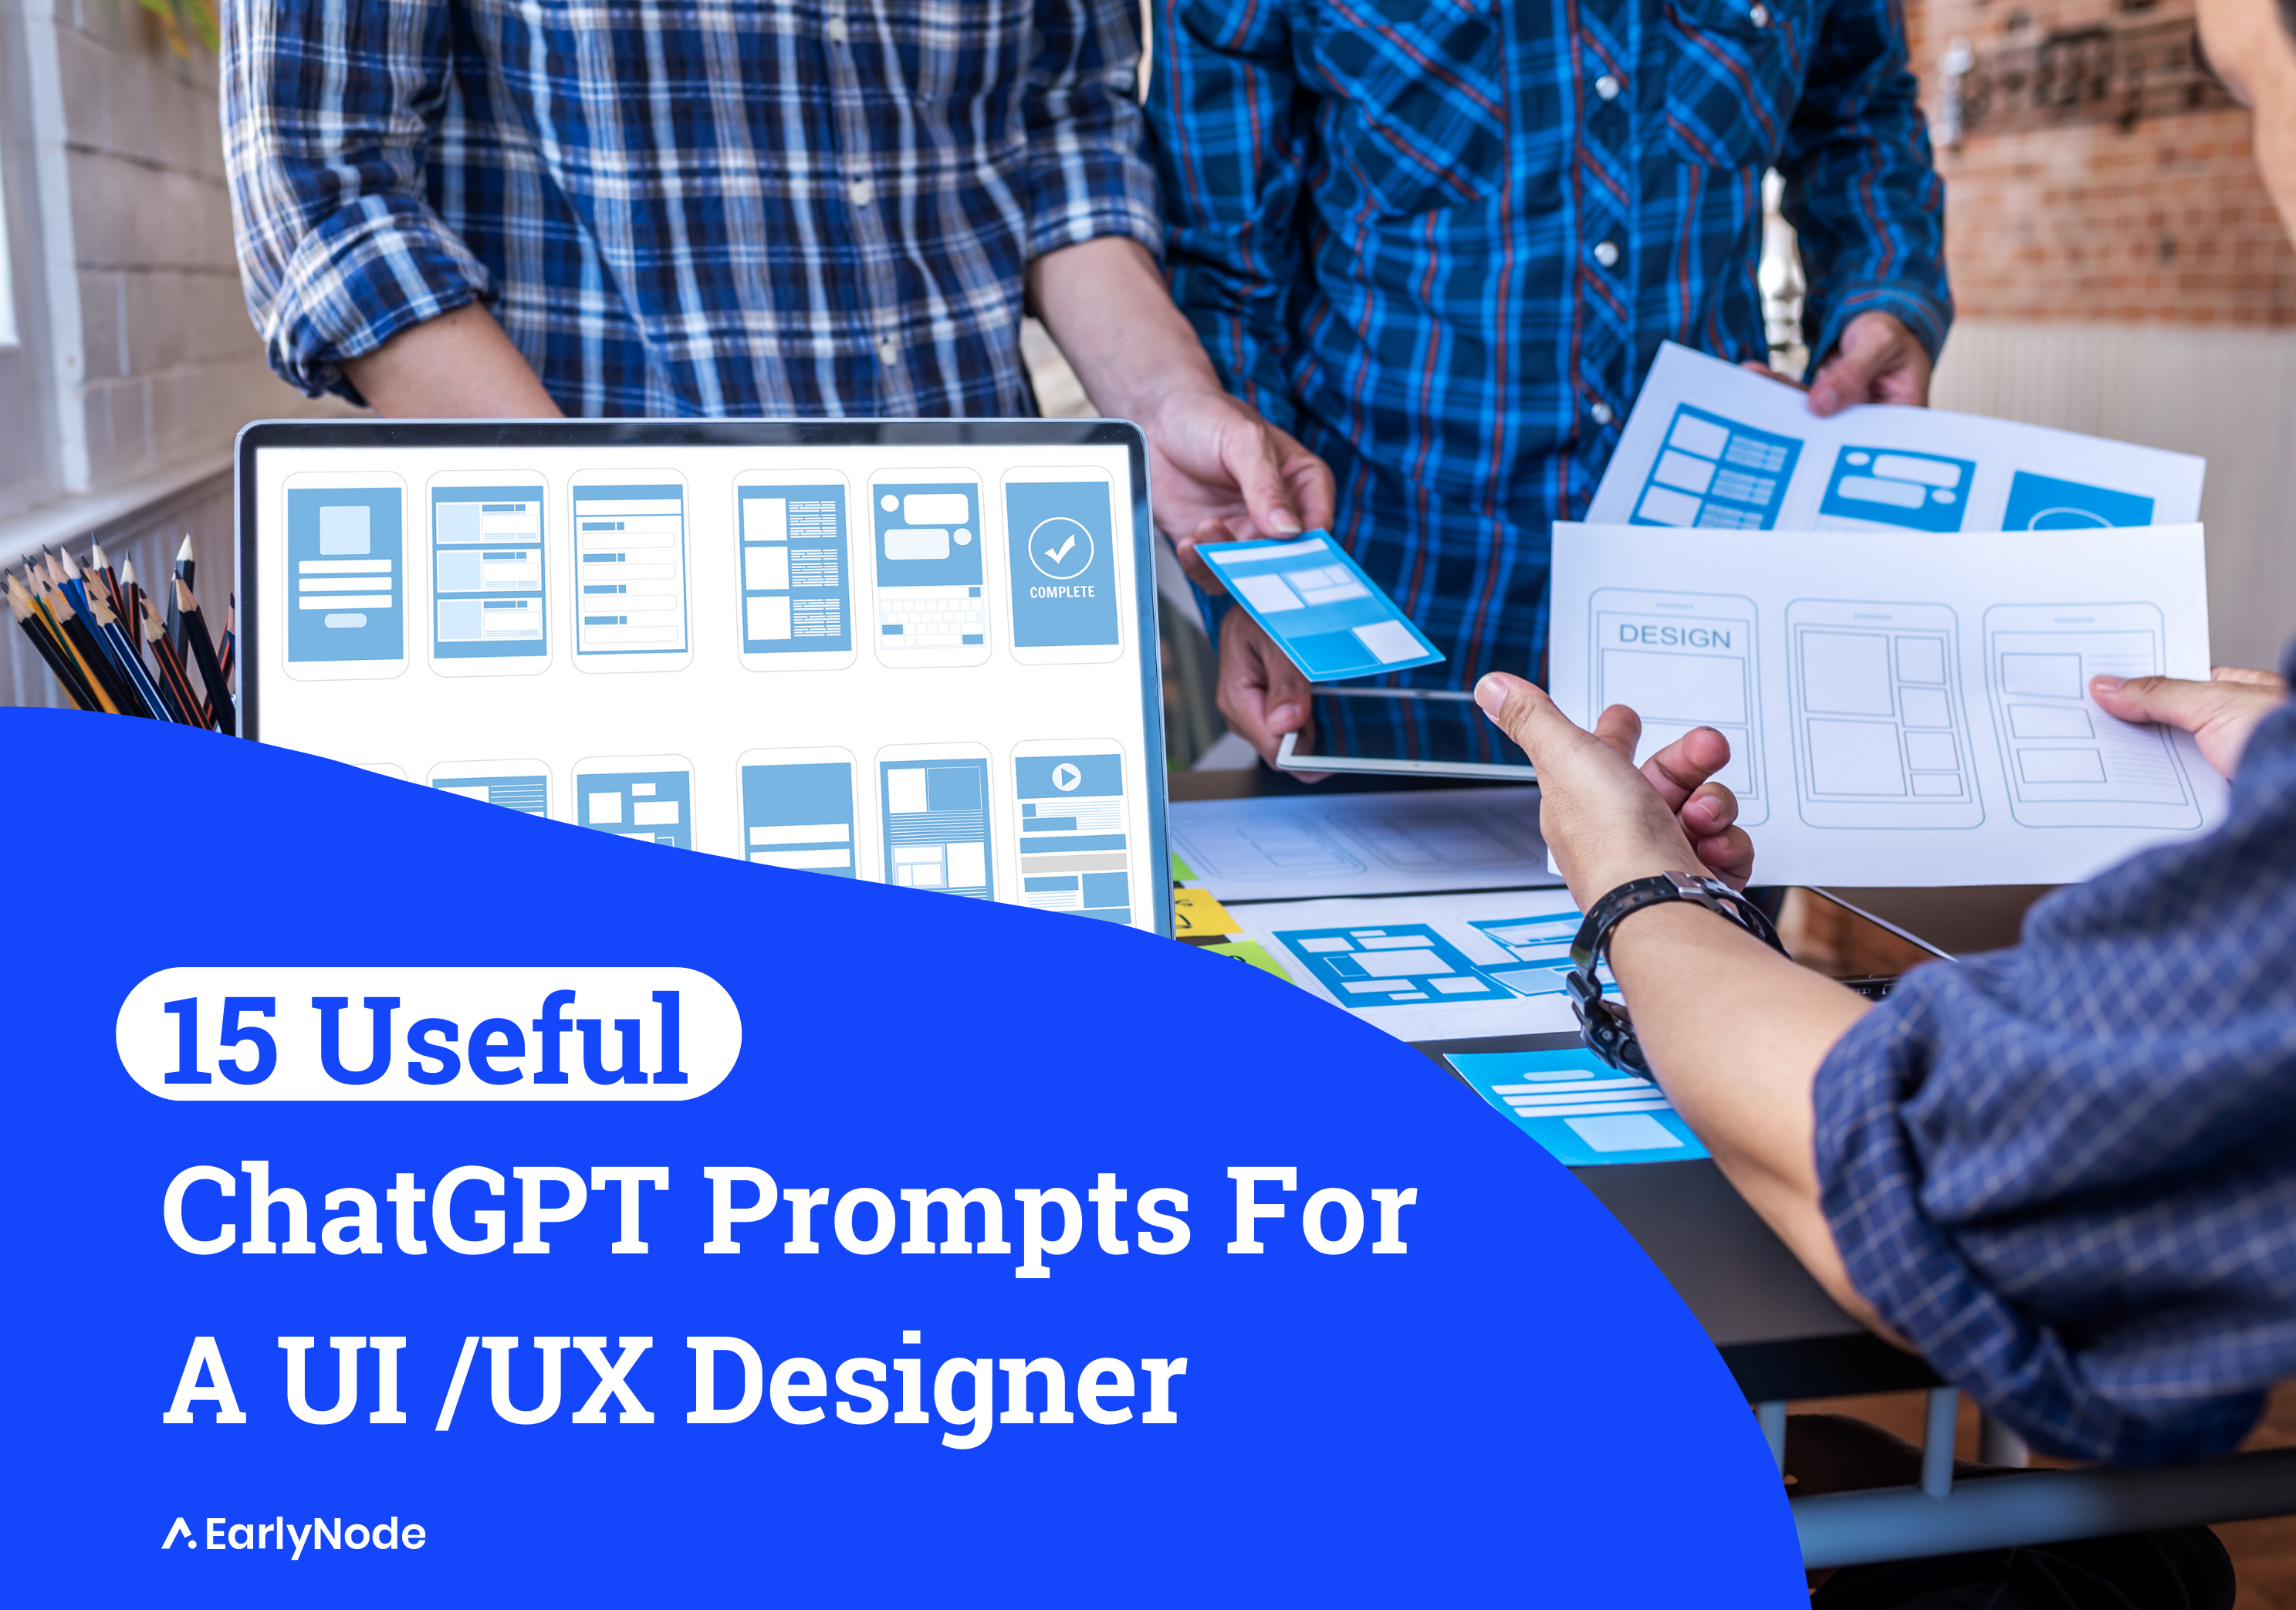 15 Tailored ChatGPT Prompts for UI/UX Designers